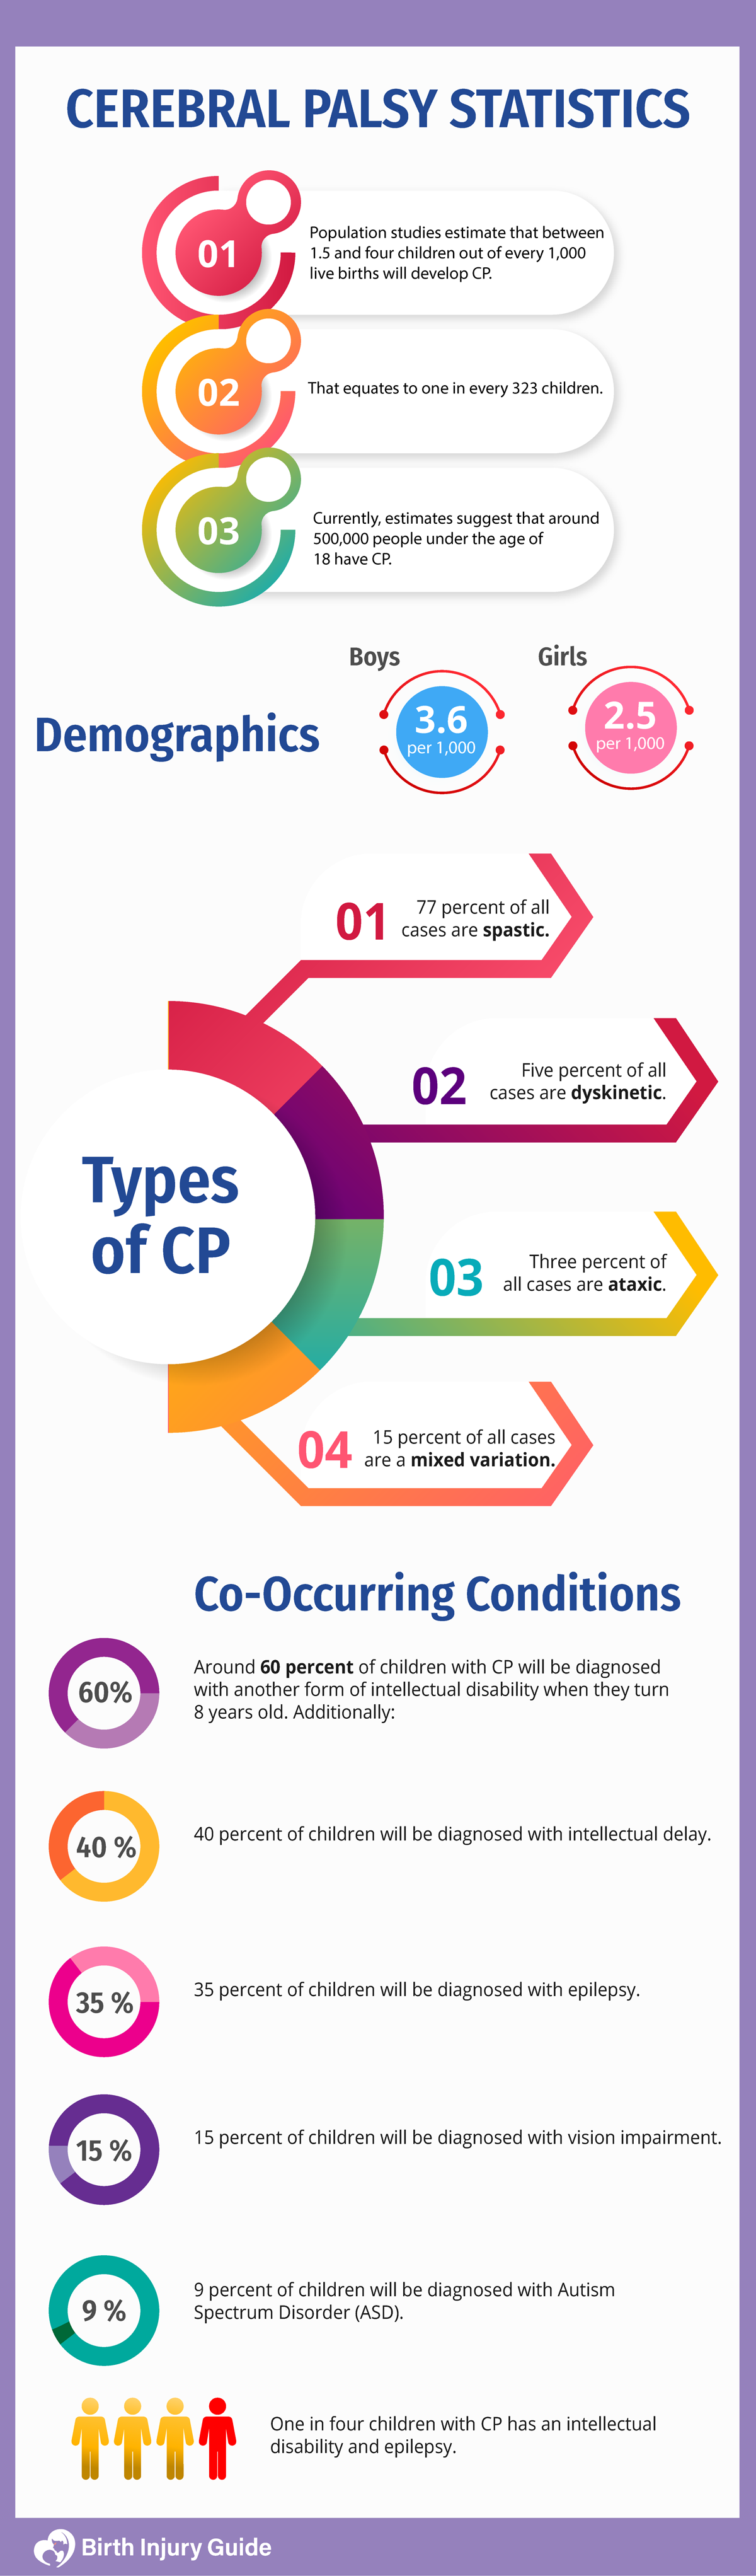 cerebral palsy worldwide statistics, boys and girls; types of cp and conditions.